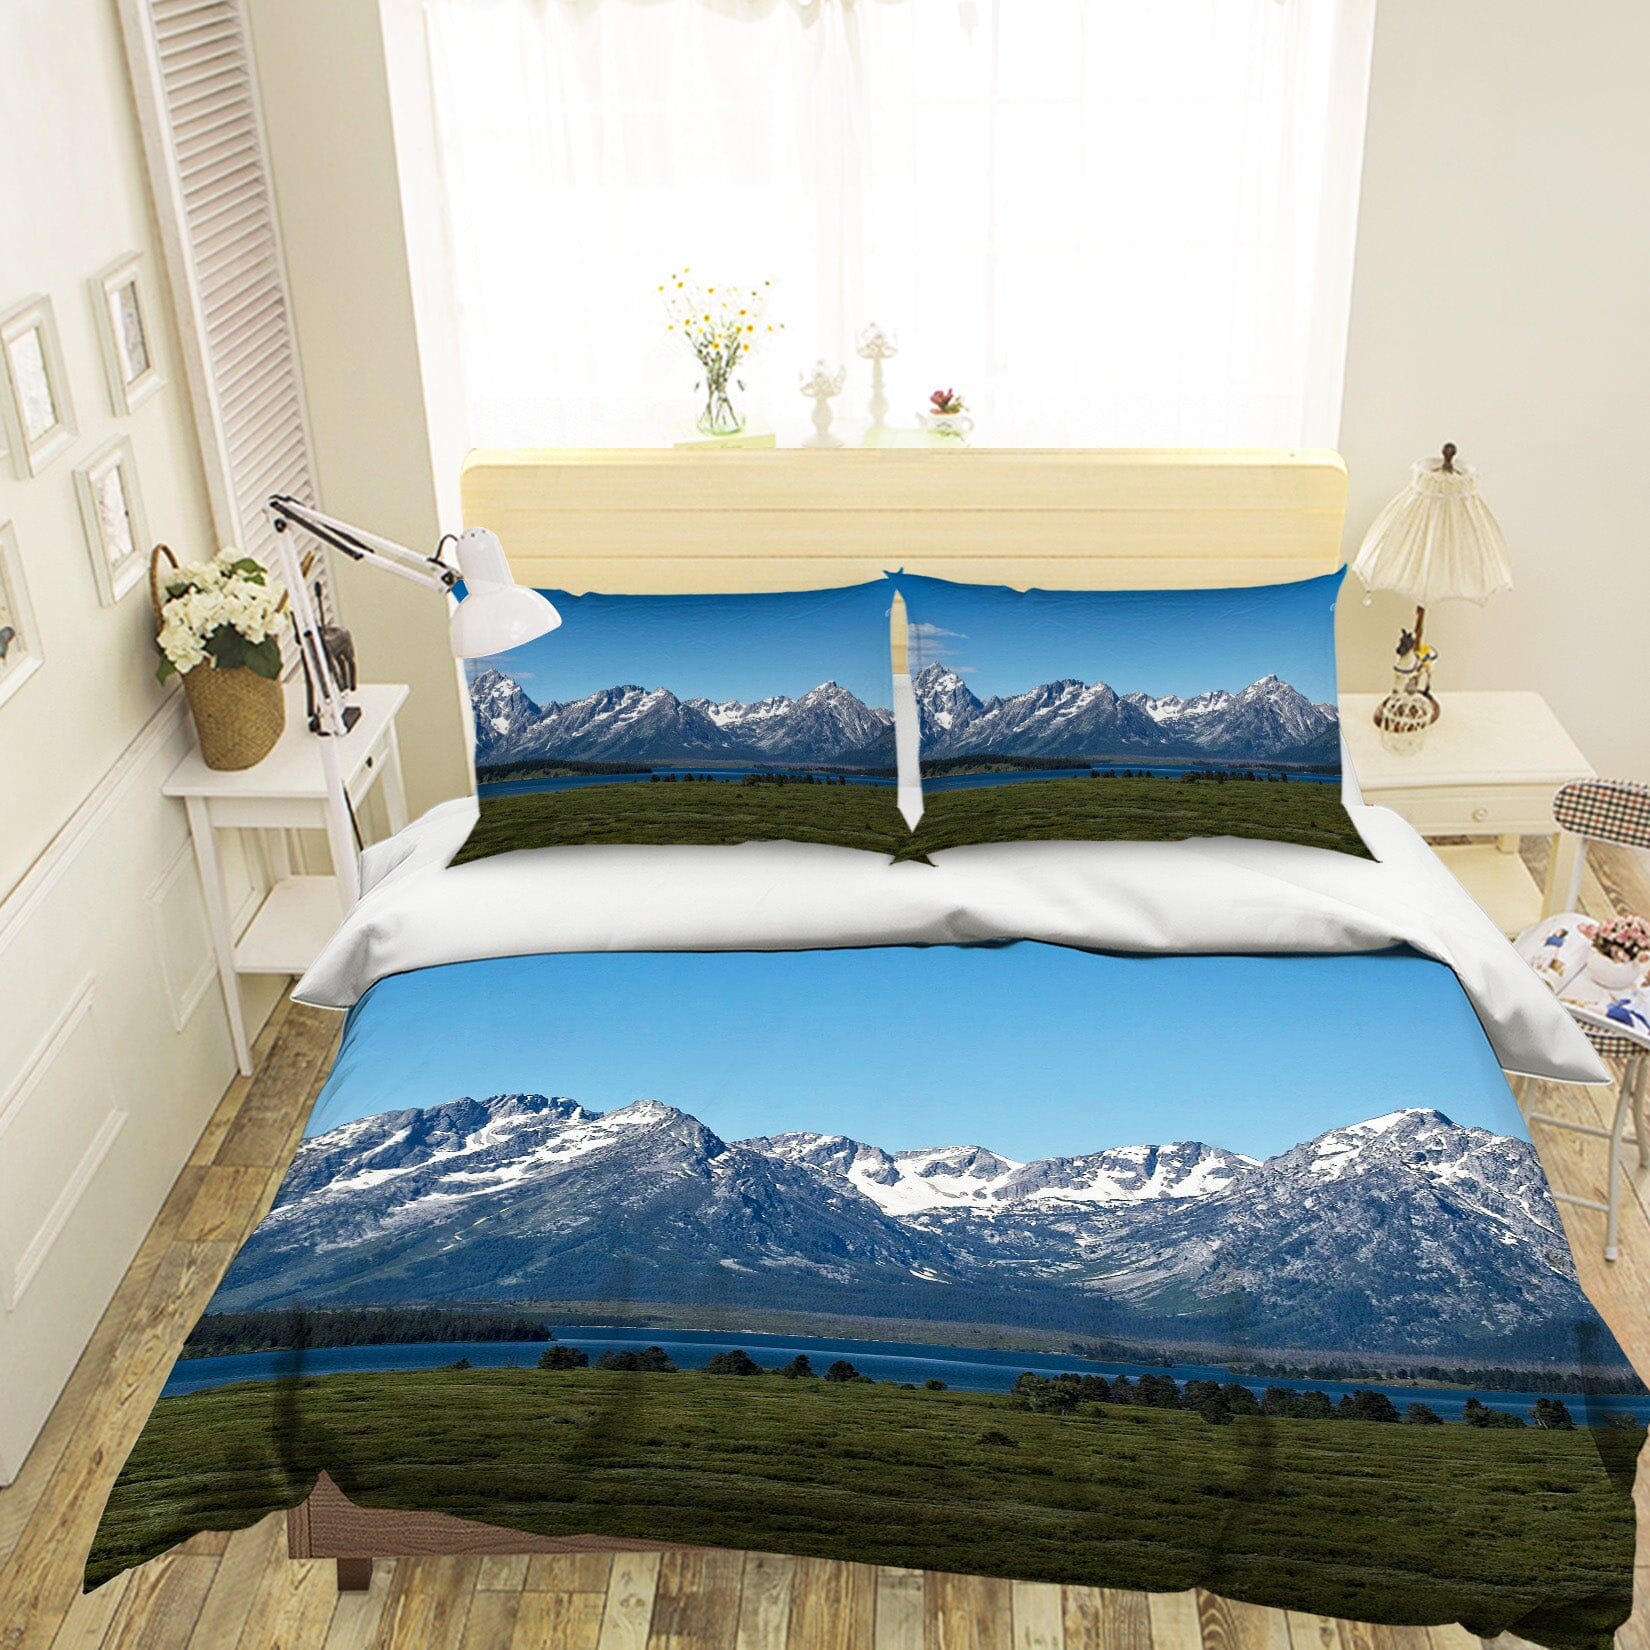 3D Snow Mountain 2121 Kathy Barefield Bedding Bed Pillowcases Quilt Quiet Covers AJ Creativity Home 